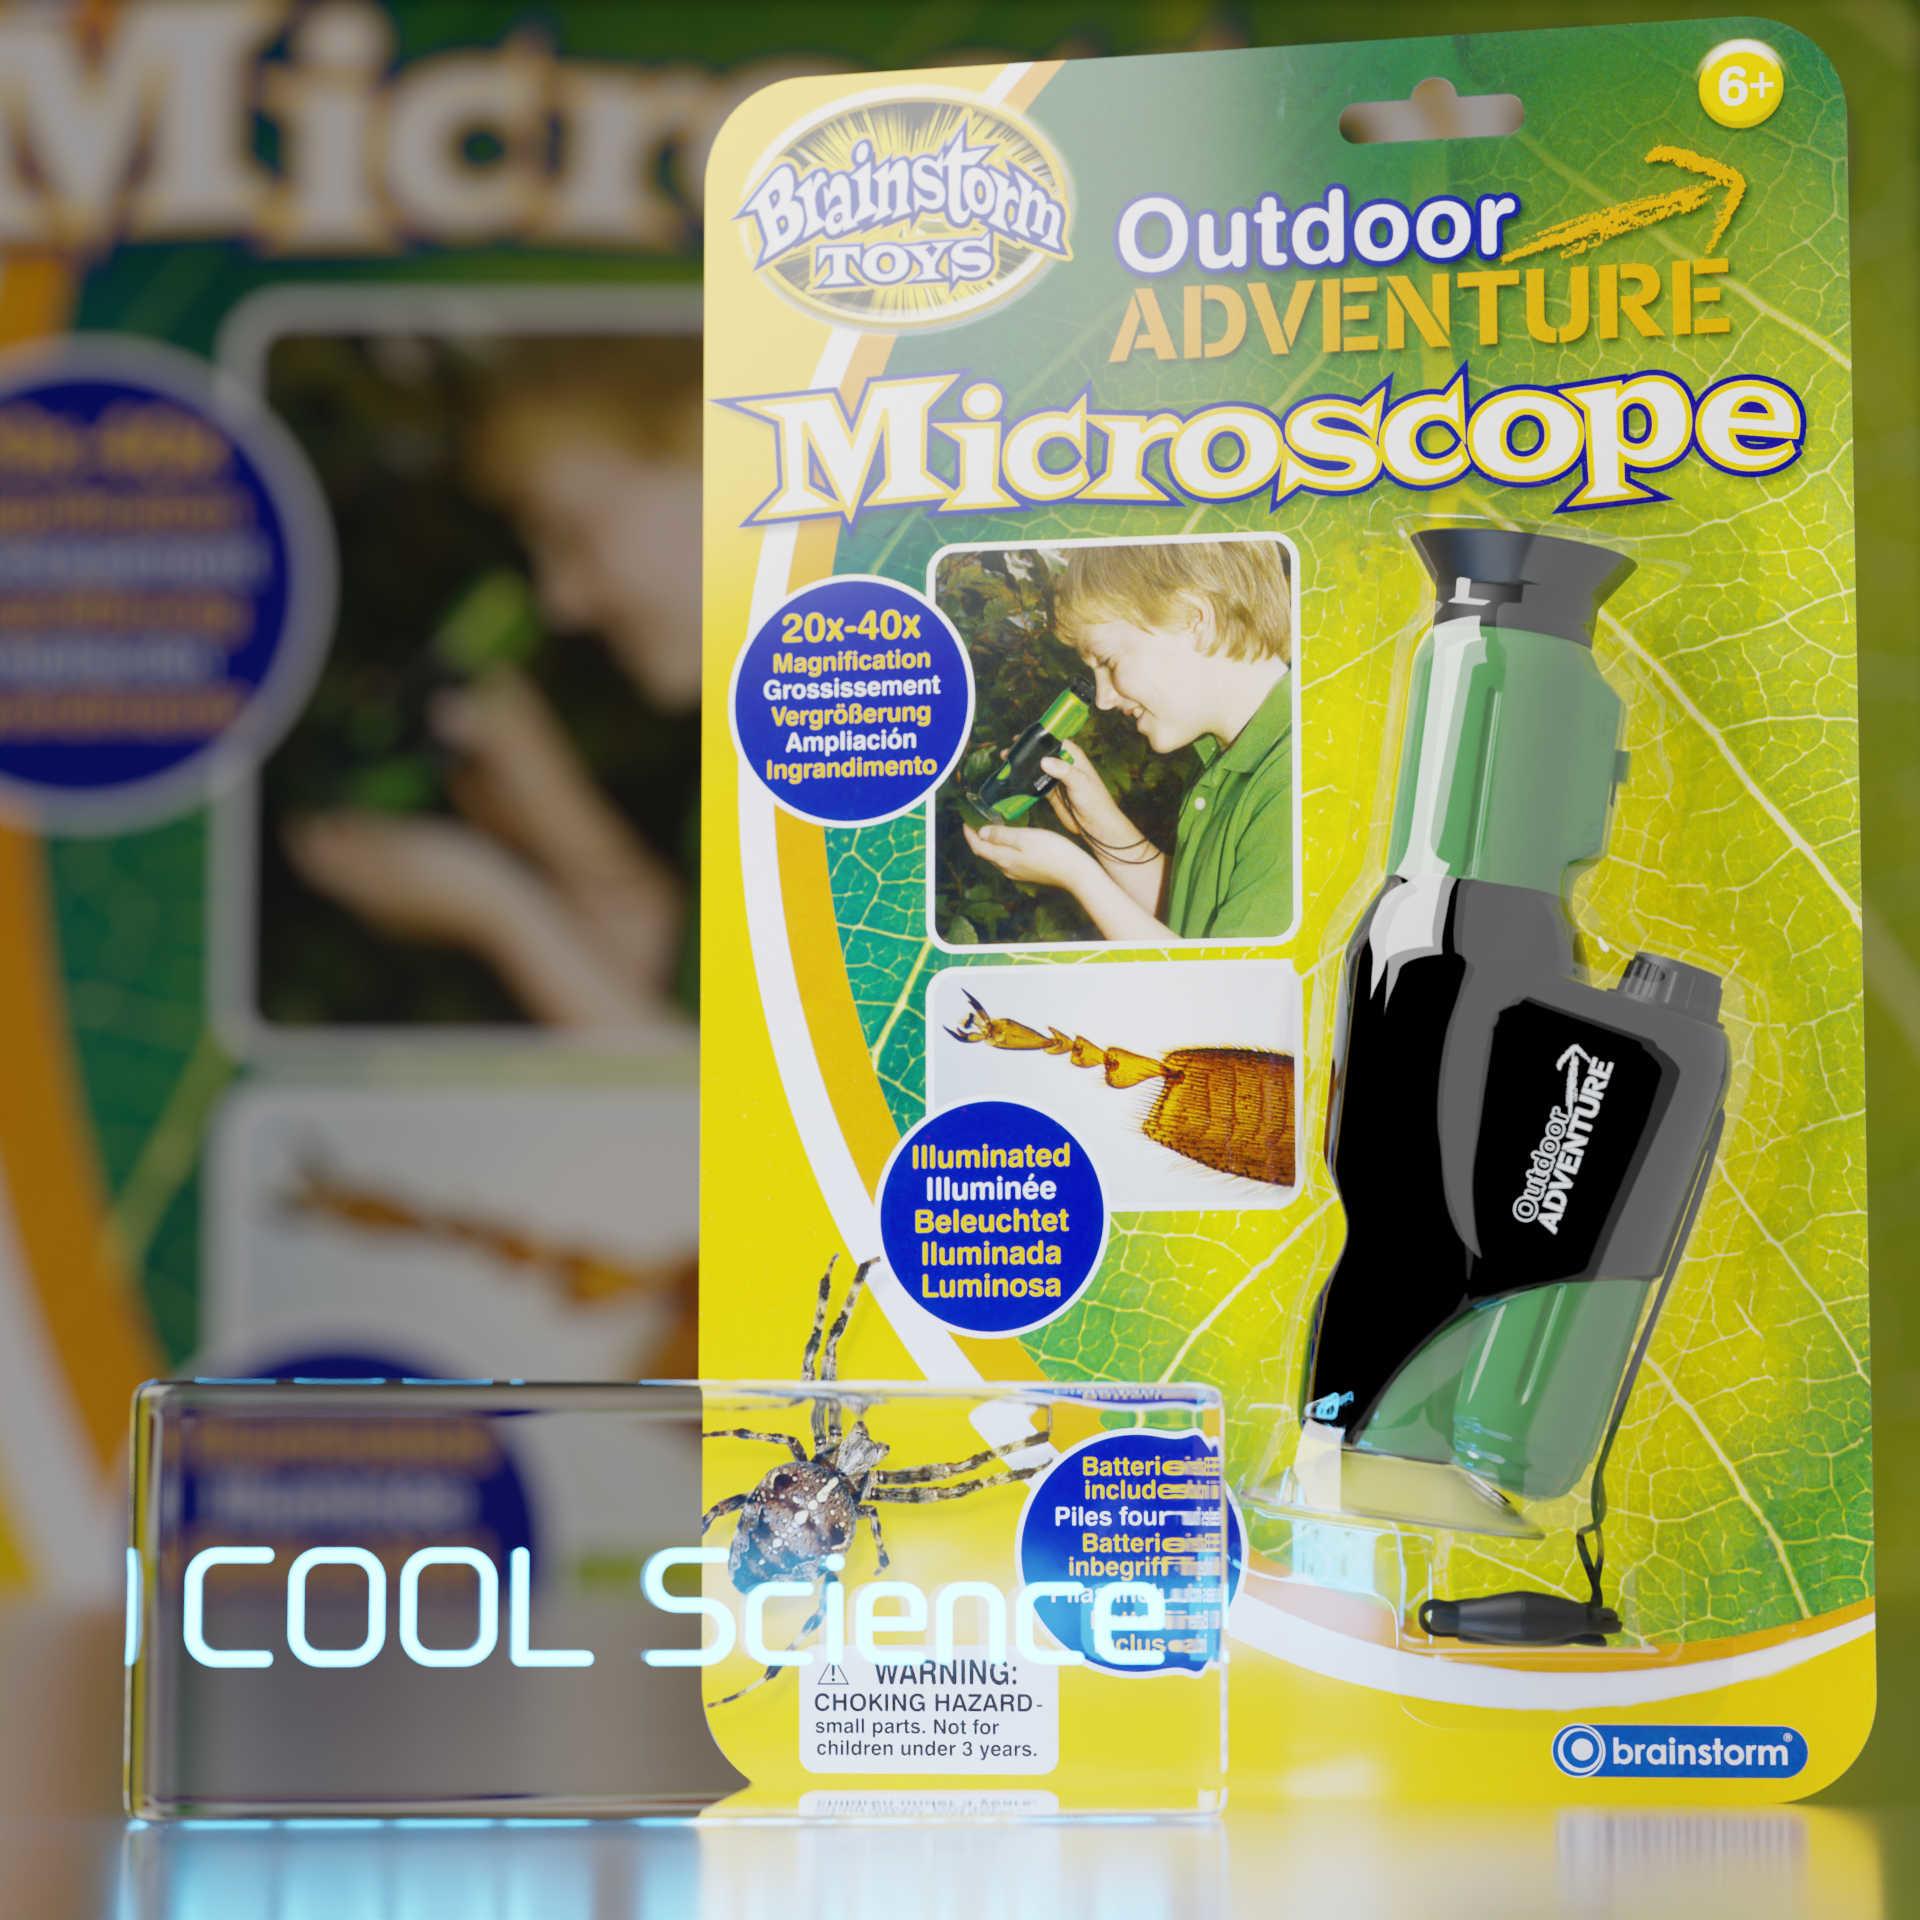 Front View of the Brainstorm Outdoor Adventure Microscope on it’s backing card